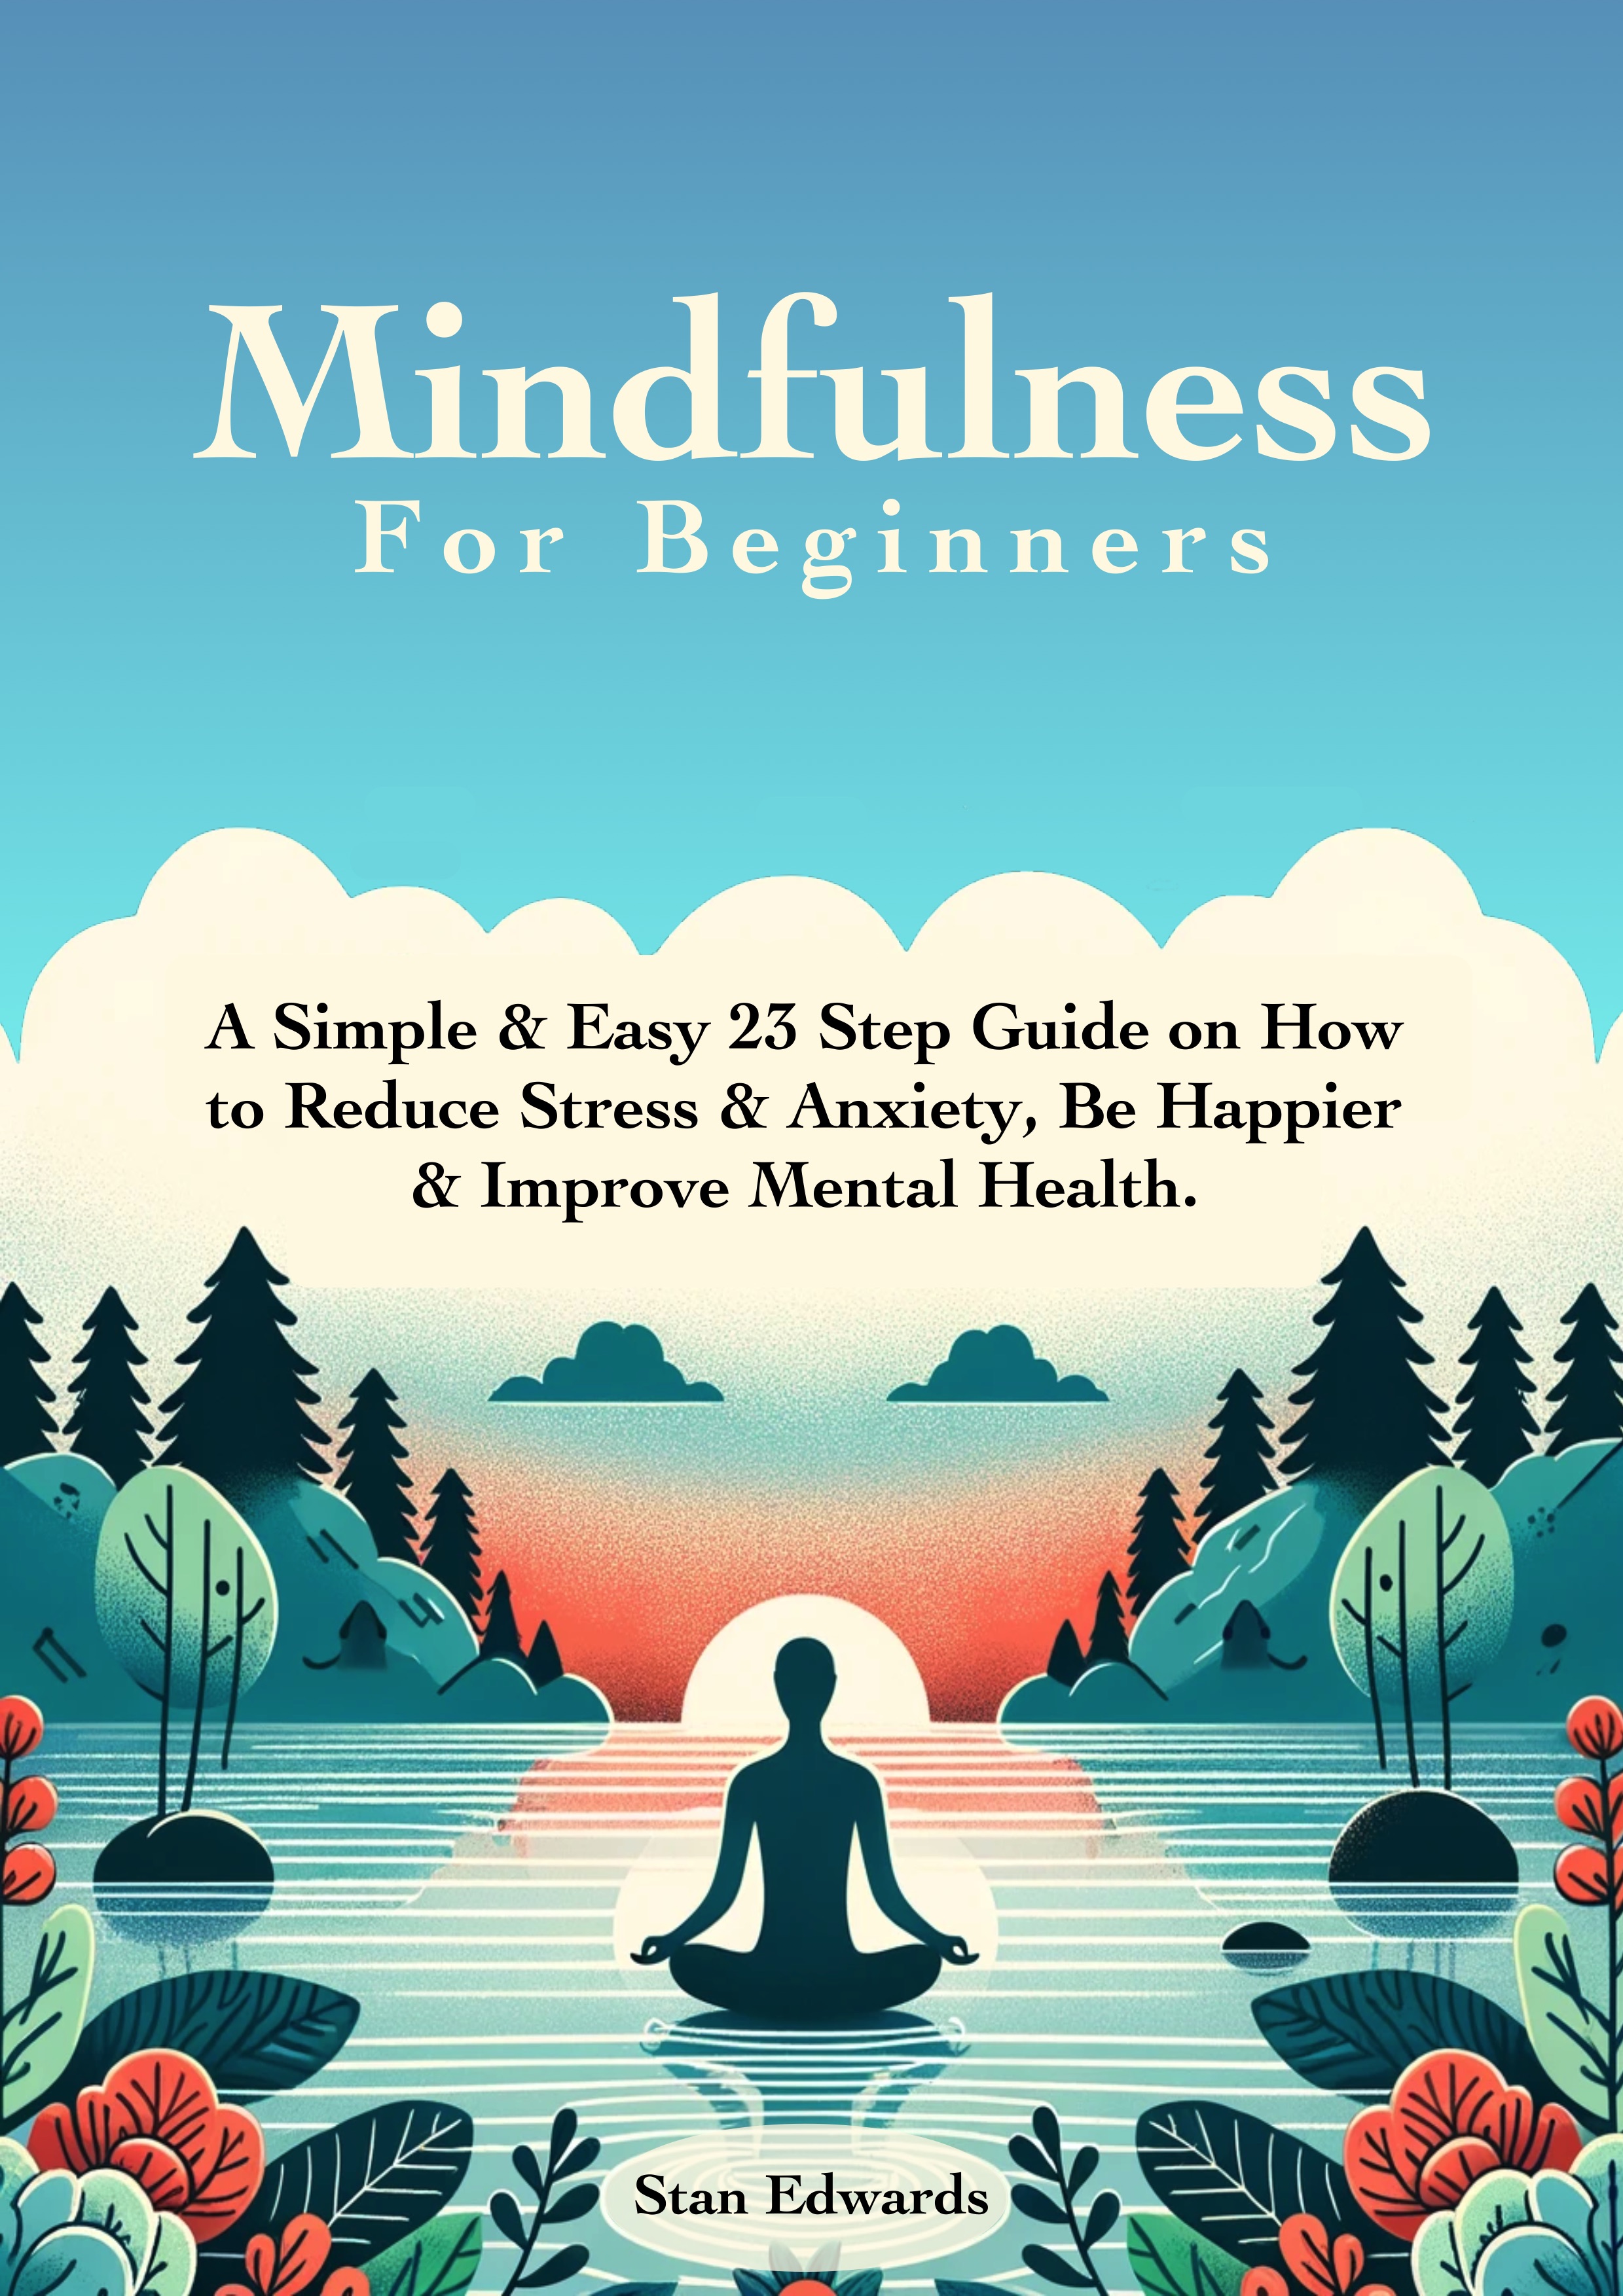 New Book ‘Mindfulness For Beginners’ Guides Readers to Reduce Stress, Boost Mental Health, and Find Happiness Through Mindfulness